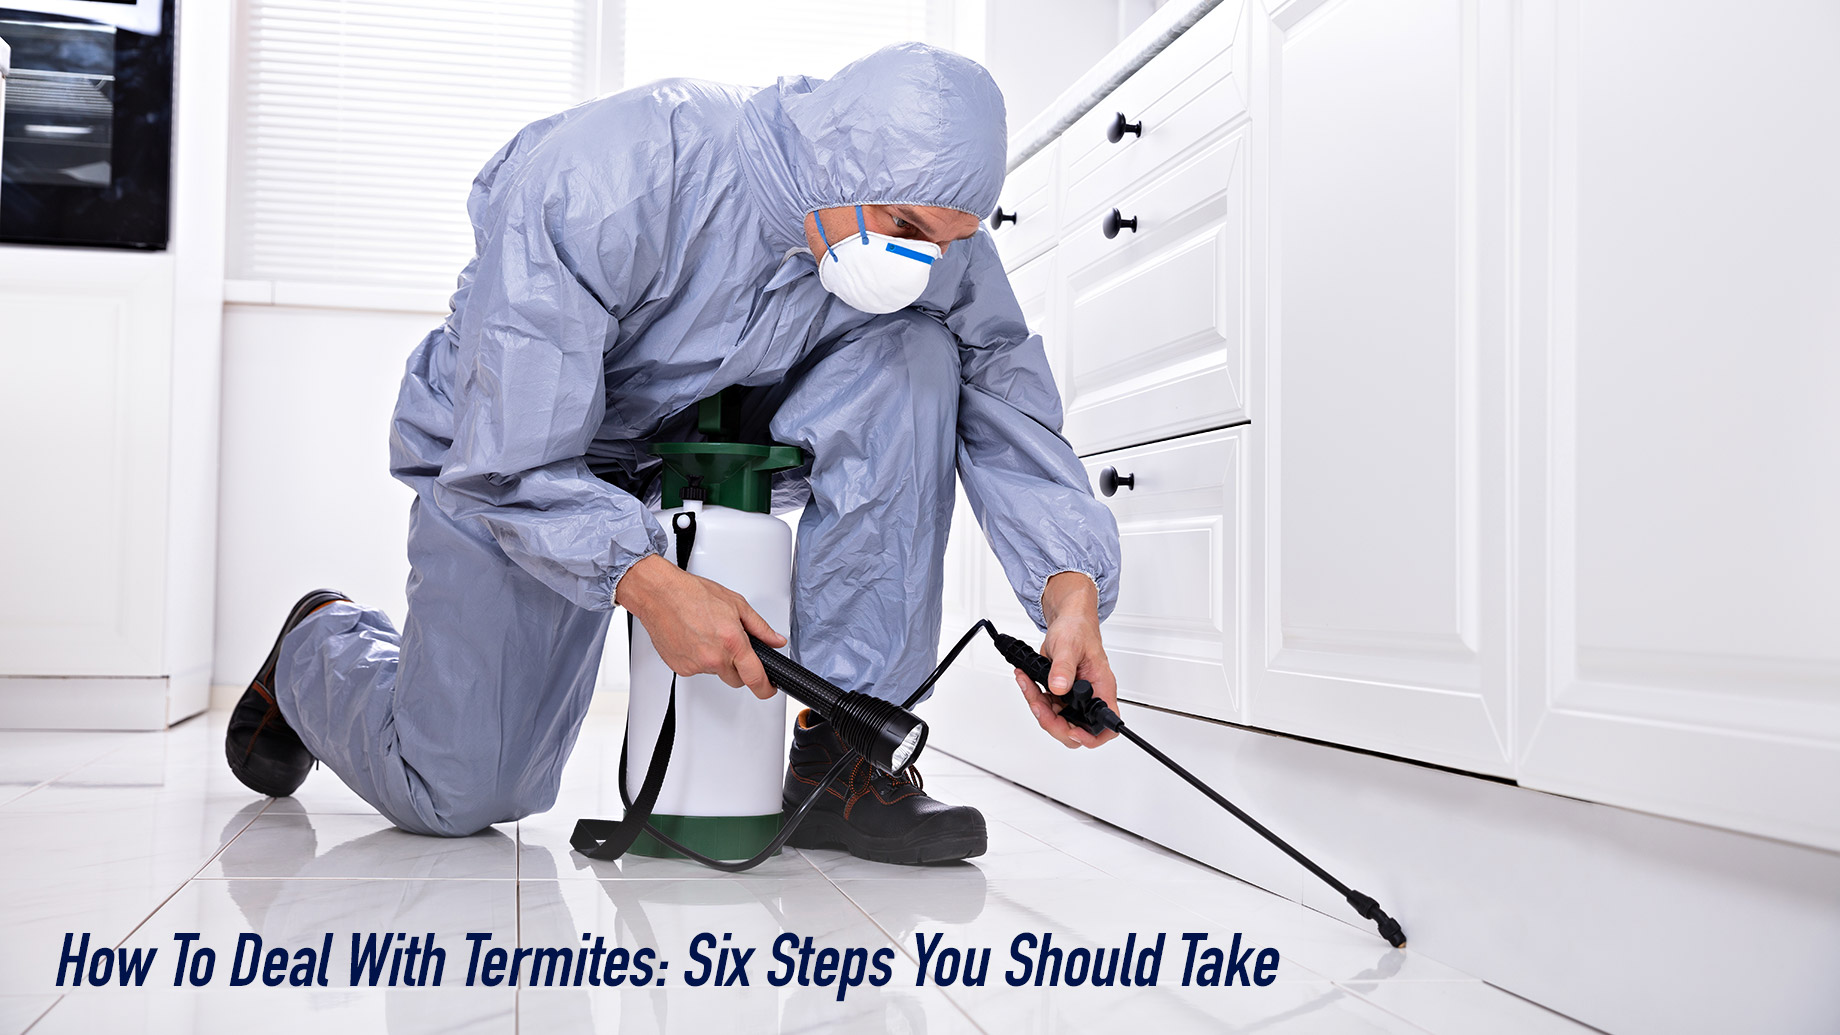 How To Deal With Termites - Six Steps You Should Take